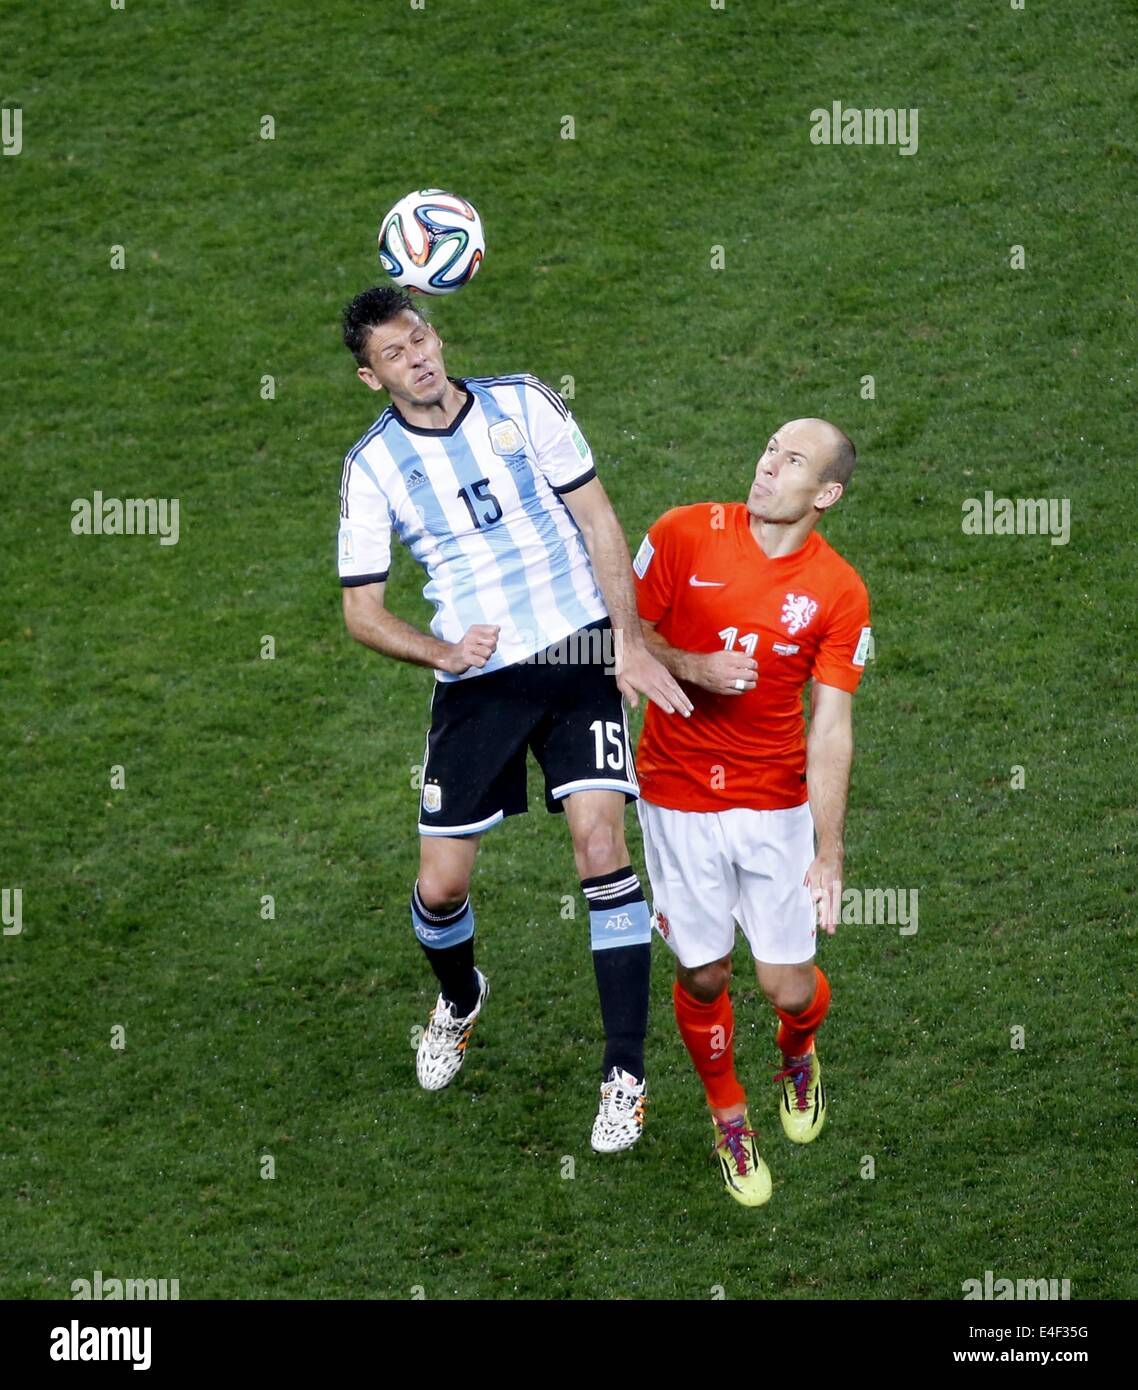 Sao Paulo, Brazil. 9th July, 2014. Netherlands' Arjen Robben competes for a header with Argentina's Martin Demichelis during a semifinal match between Netherlands and Argentina of 2014 FIFA World Cup at the Arena de Sao Paulo Stadium in Sao Paulo, Brazil, on July 9, 2014. Credit:  Liao Yujie/Xinhua/Alamy Live News Stock Photo